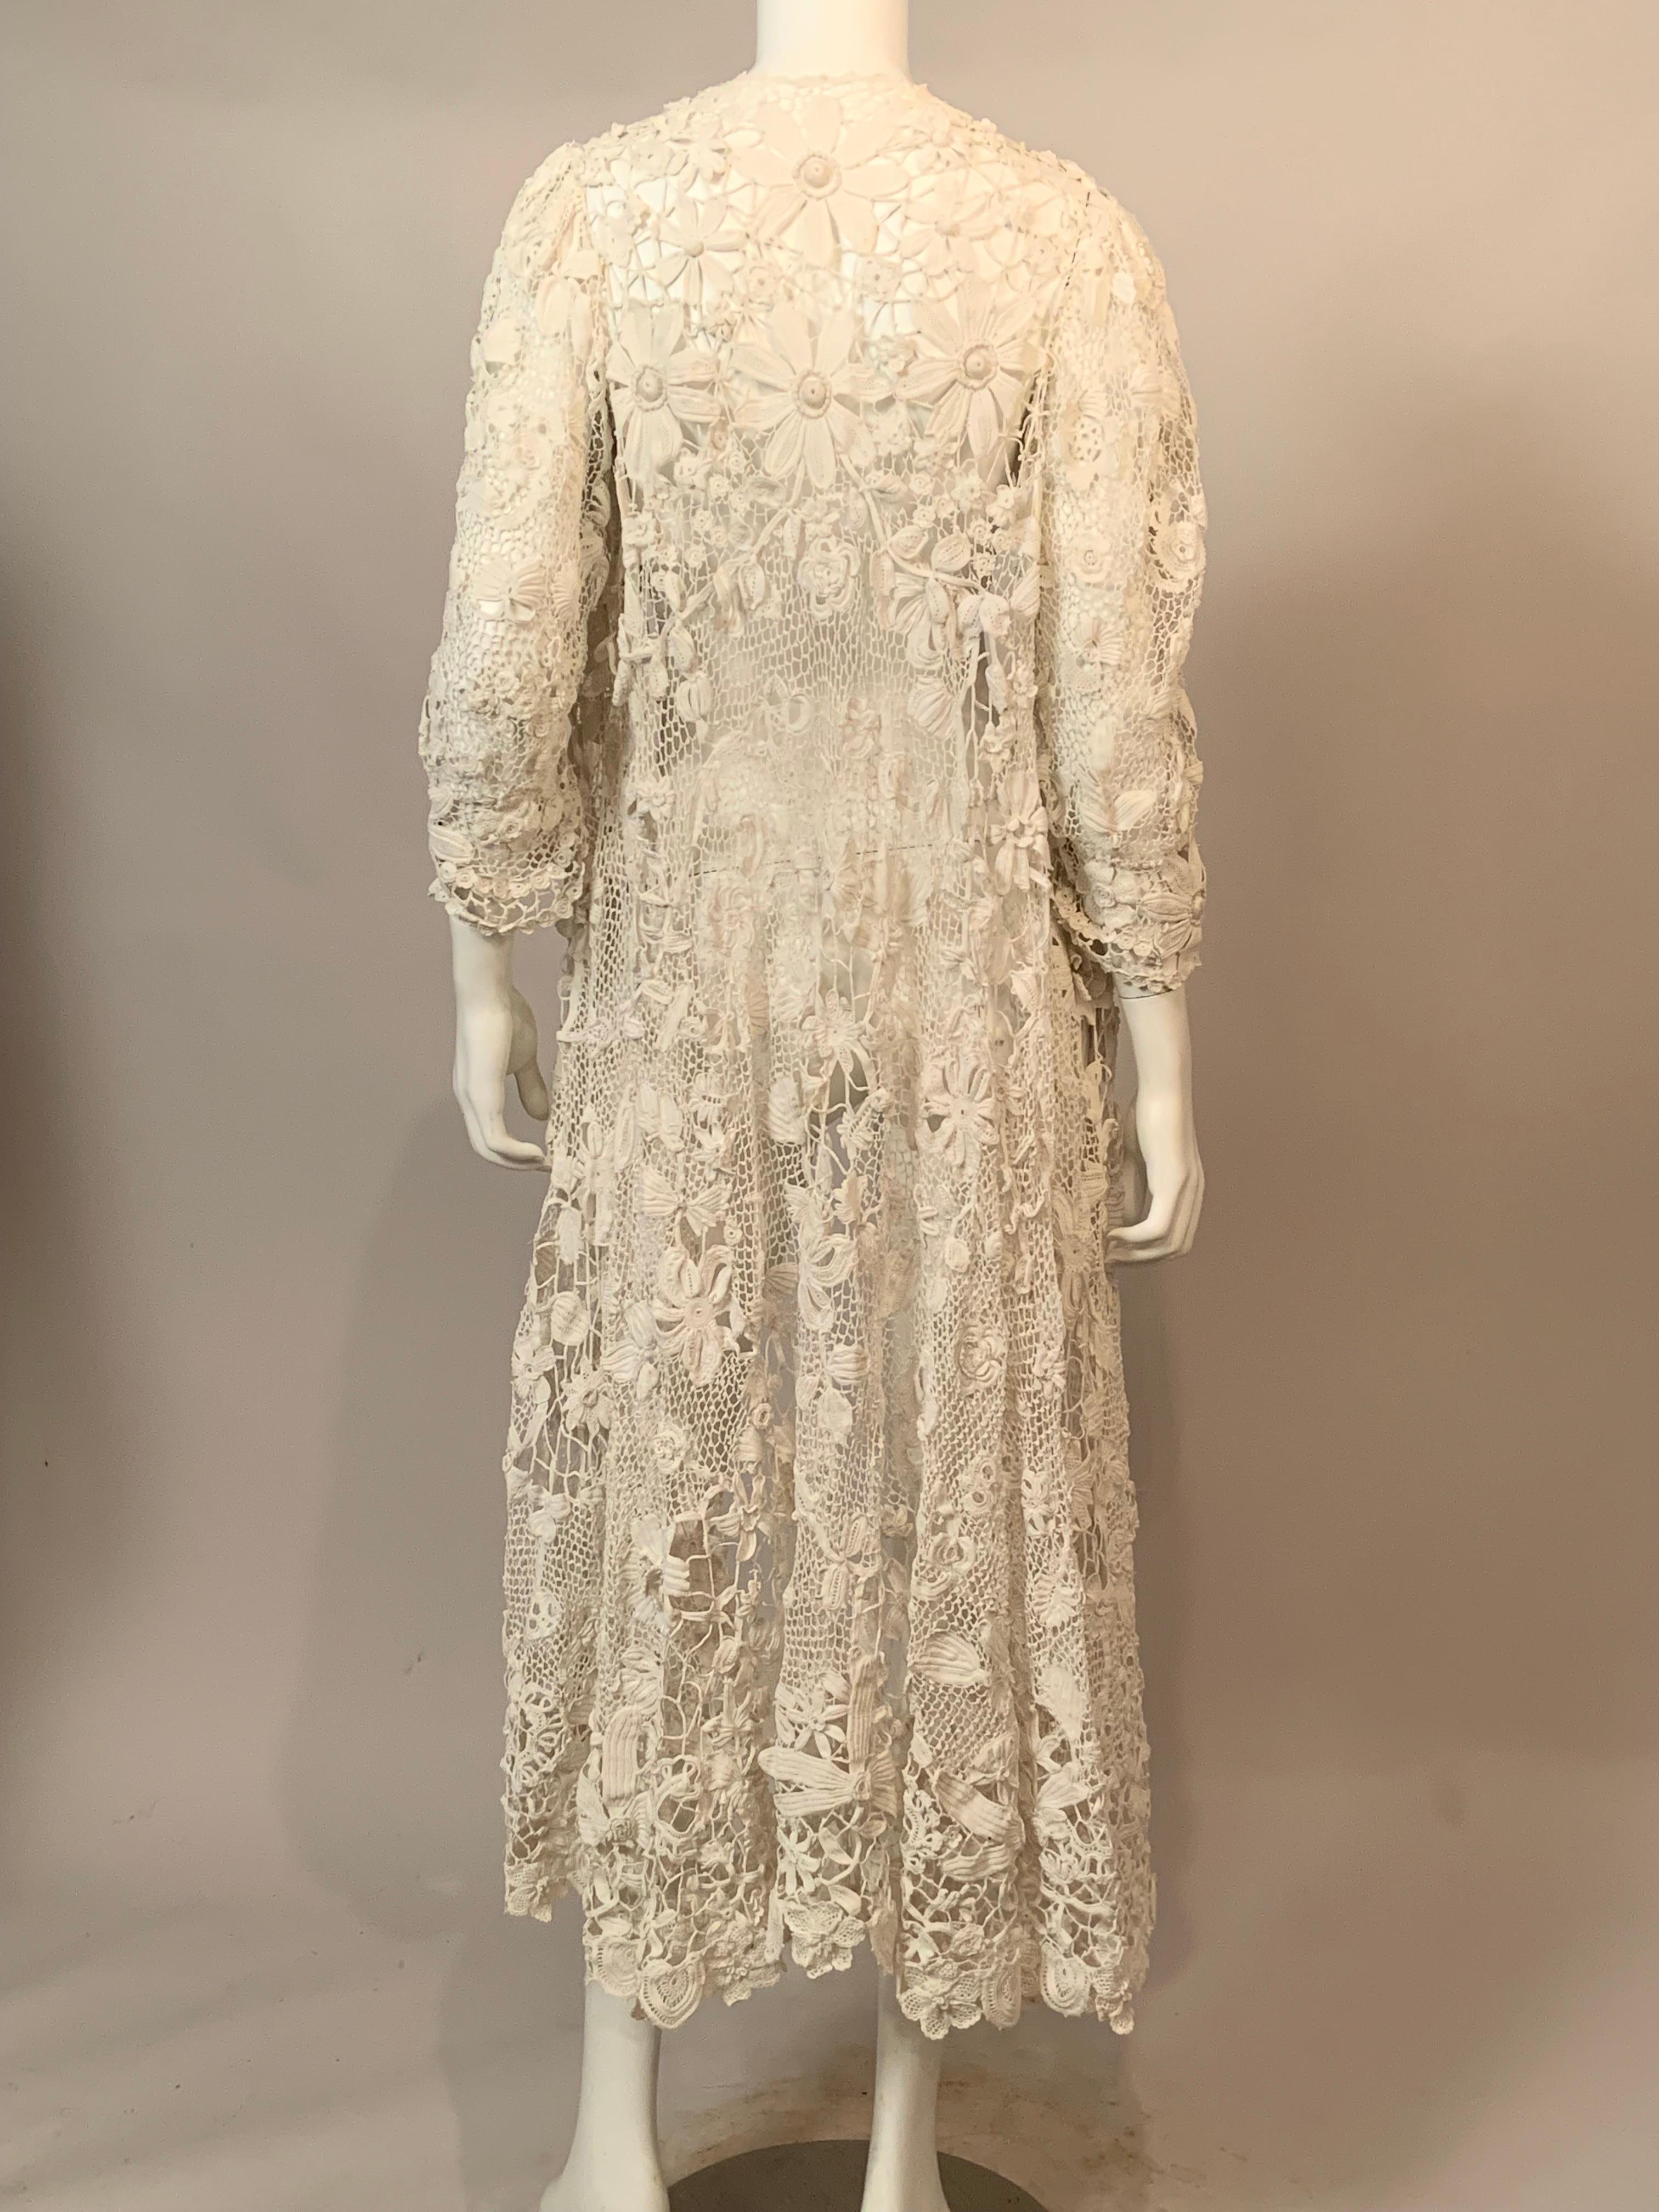 Hand Made Irish Lace Coat with Unusual Large Floral Border circa 1900 For Sale 8